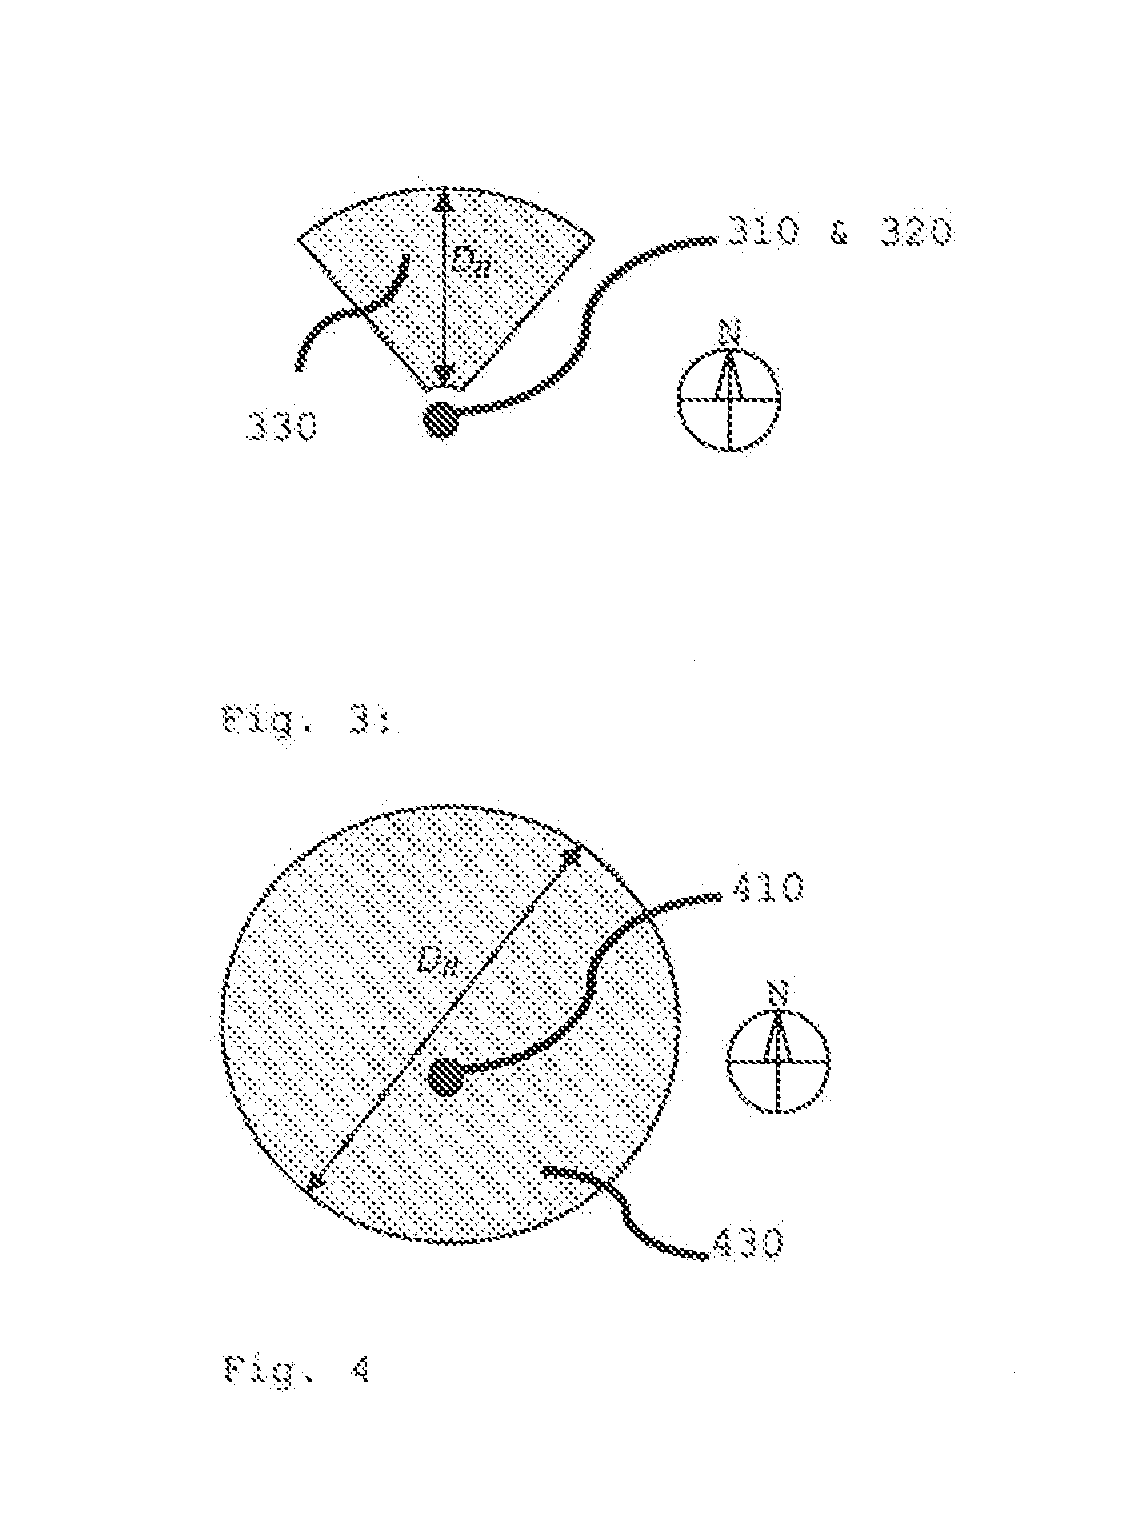 Central receiver solar system comprising a heliostat field